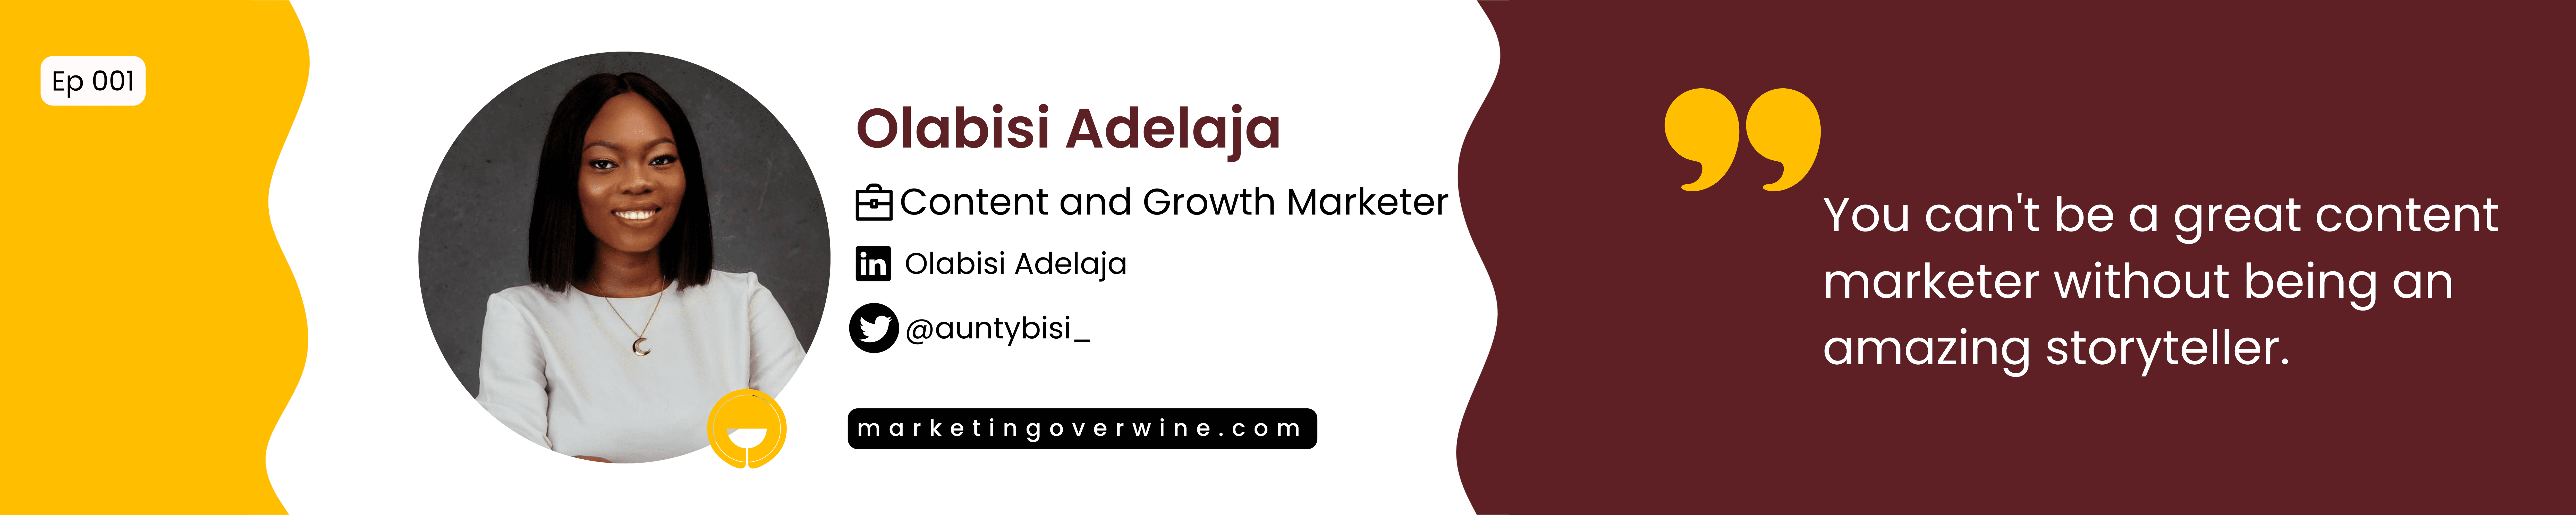 You ​can't ​be ​a ​great ​content ​marketer ​without ​being ​an ​amazing ​storyteller - Olabisi Adelaja